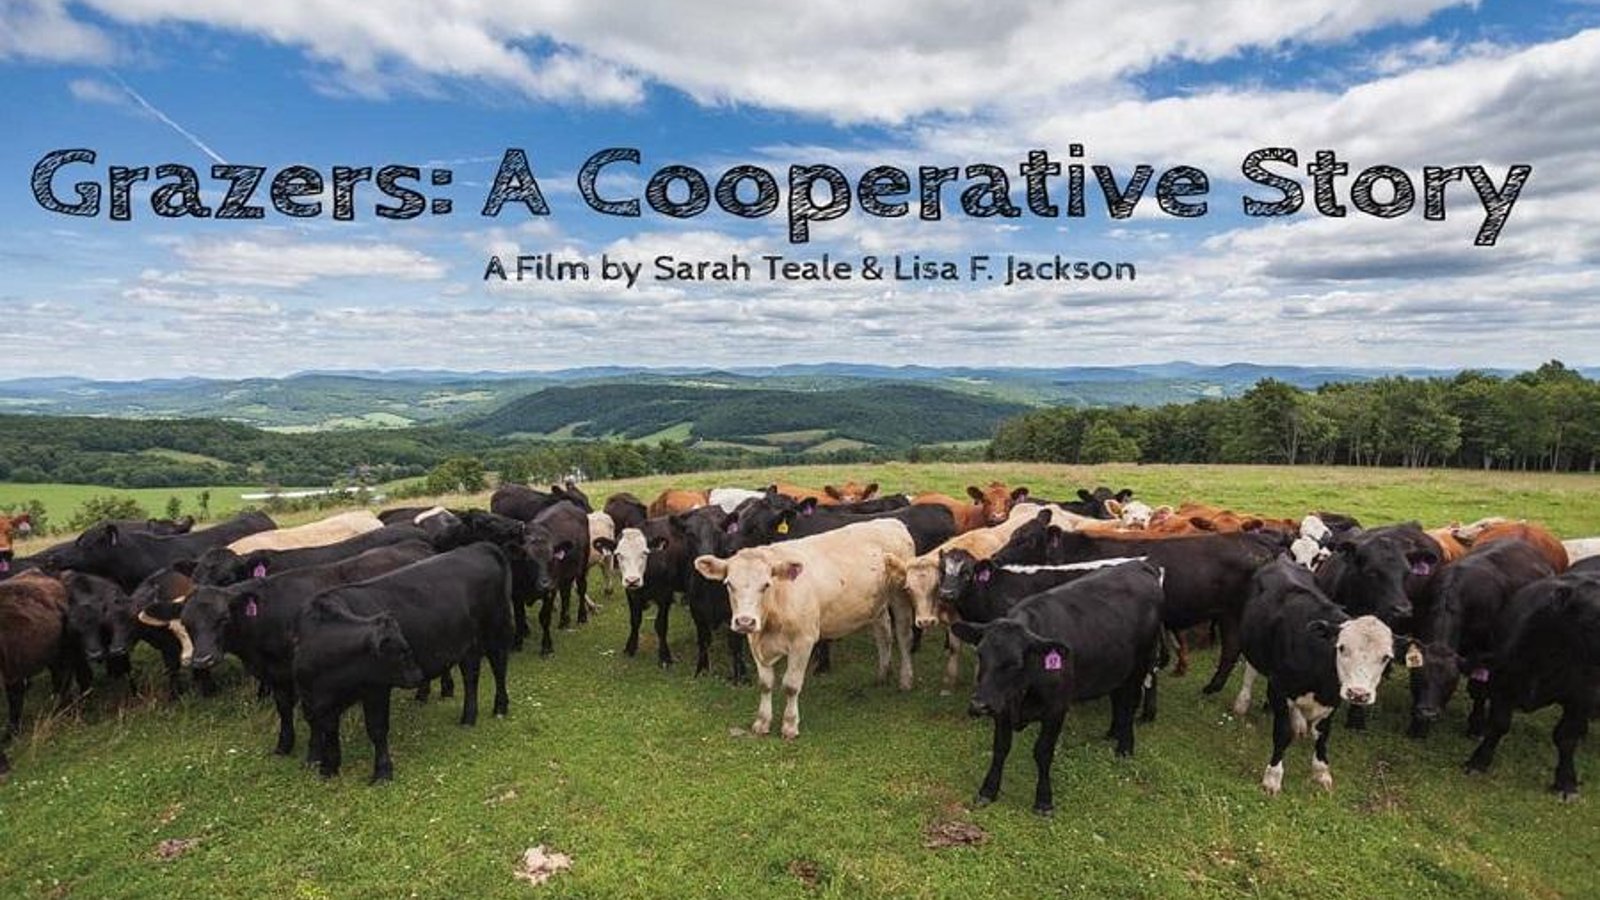 Grazers: A Cooperative Story - Local Beef Farms Competing with Industrial Companies